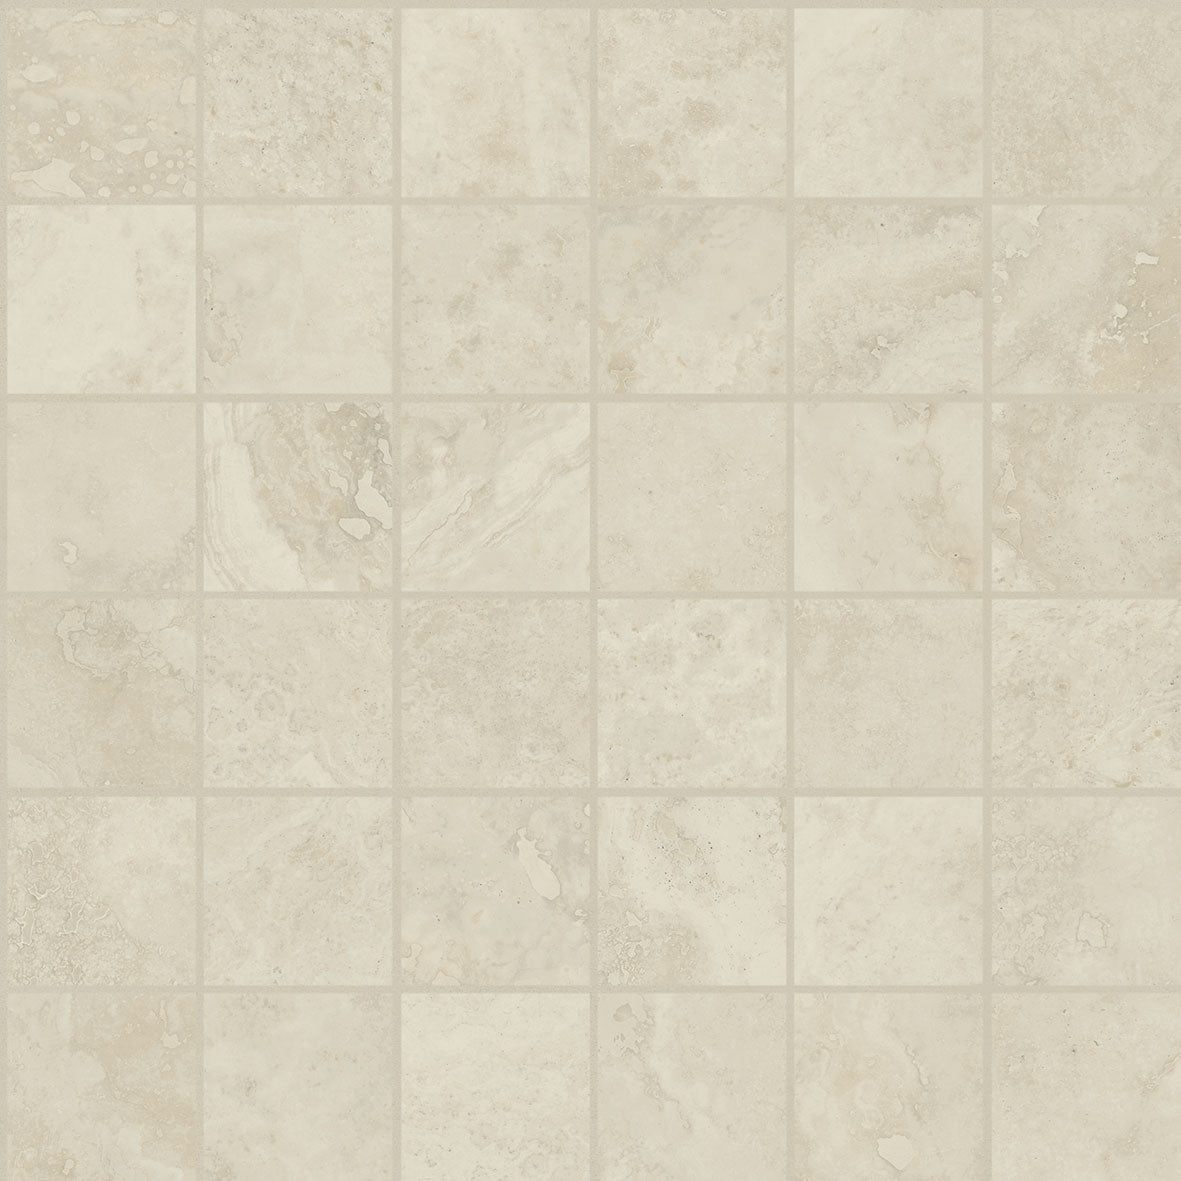 surface group international landmark grace stone precious ivory matte mosaic a straight stack 2x2 square 12x12x9 mm for outdoor application manufactured by landmark